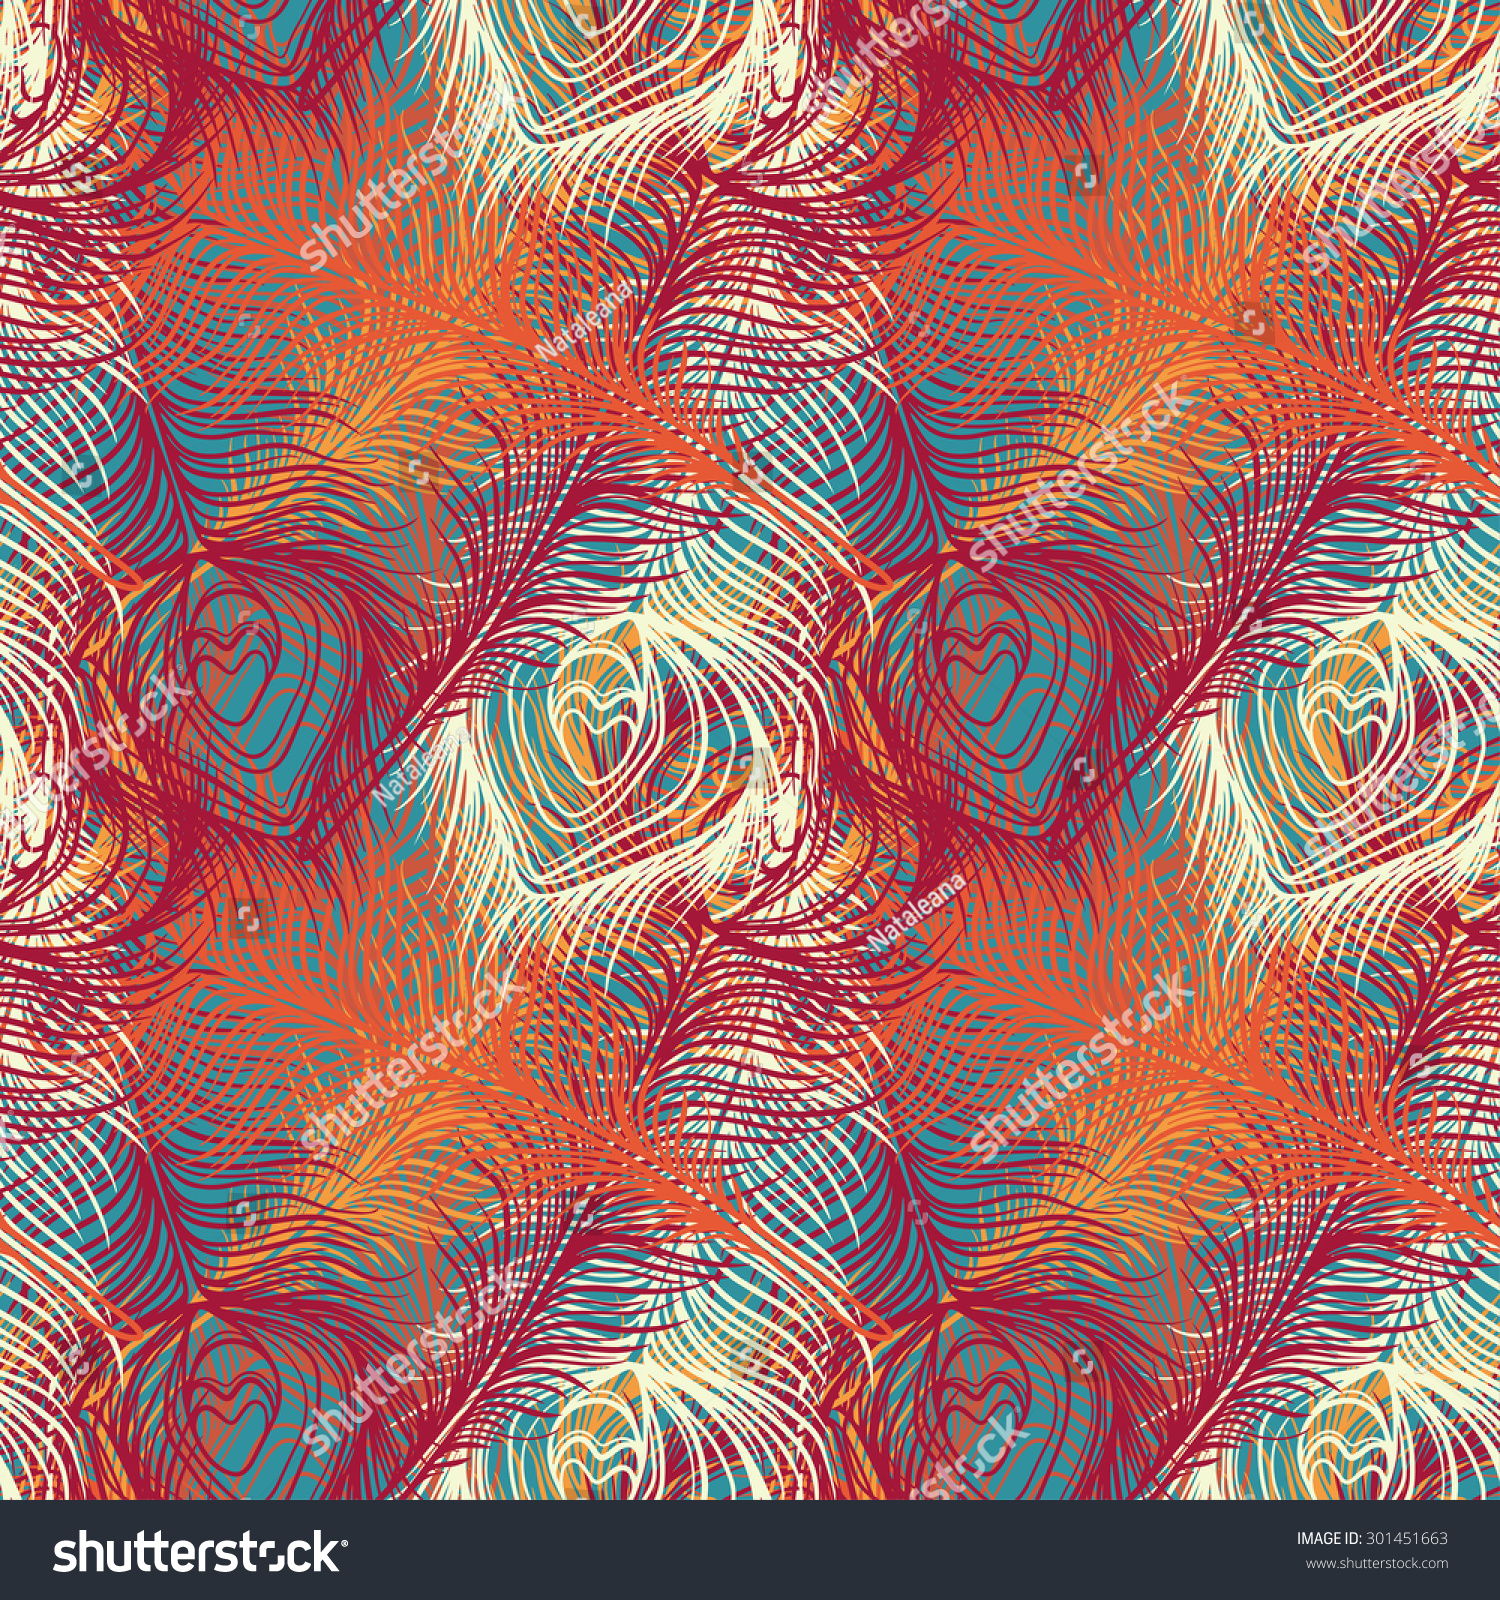 Peacock Feathers Colorful Seamless Pattern Repeating Stock Vector ...